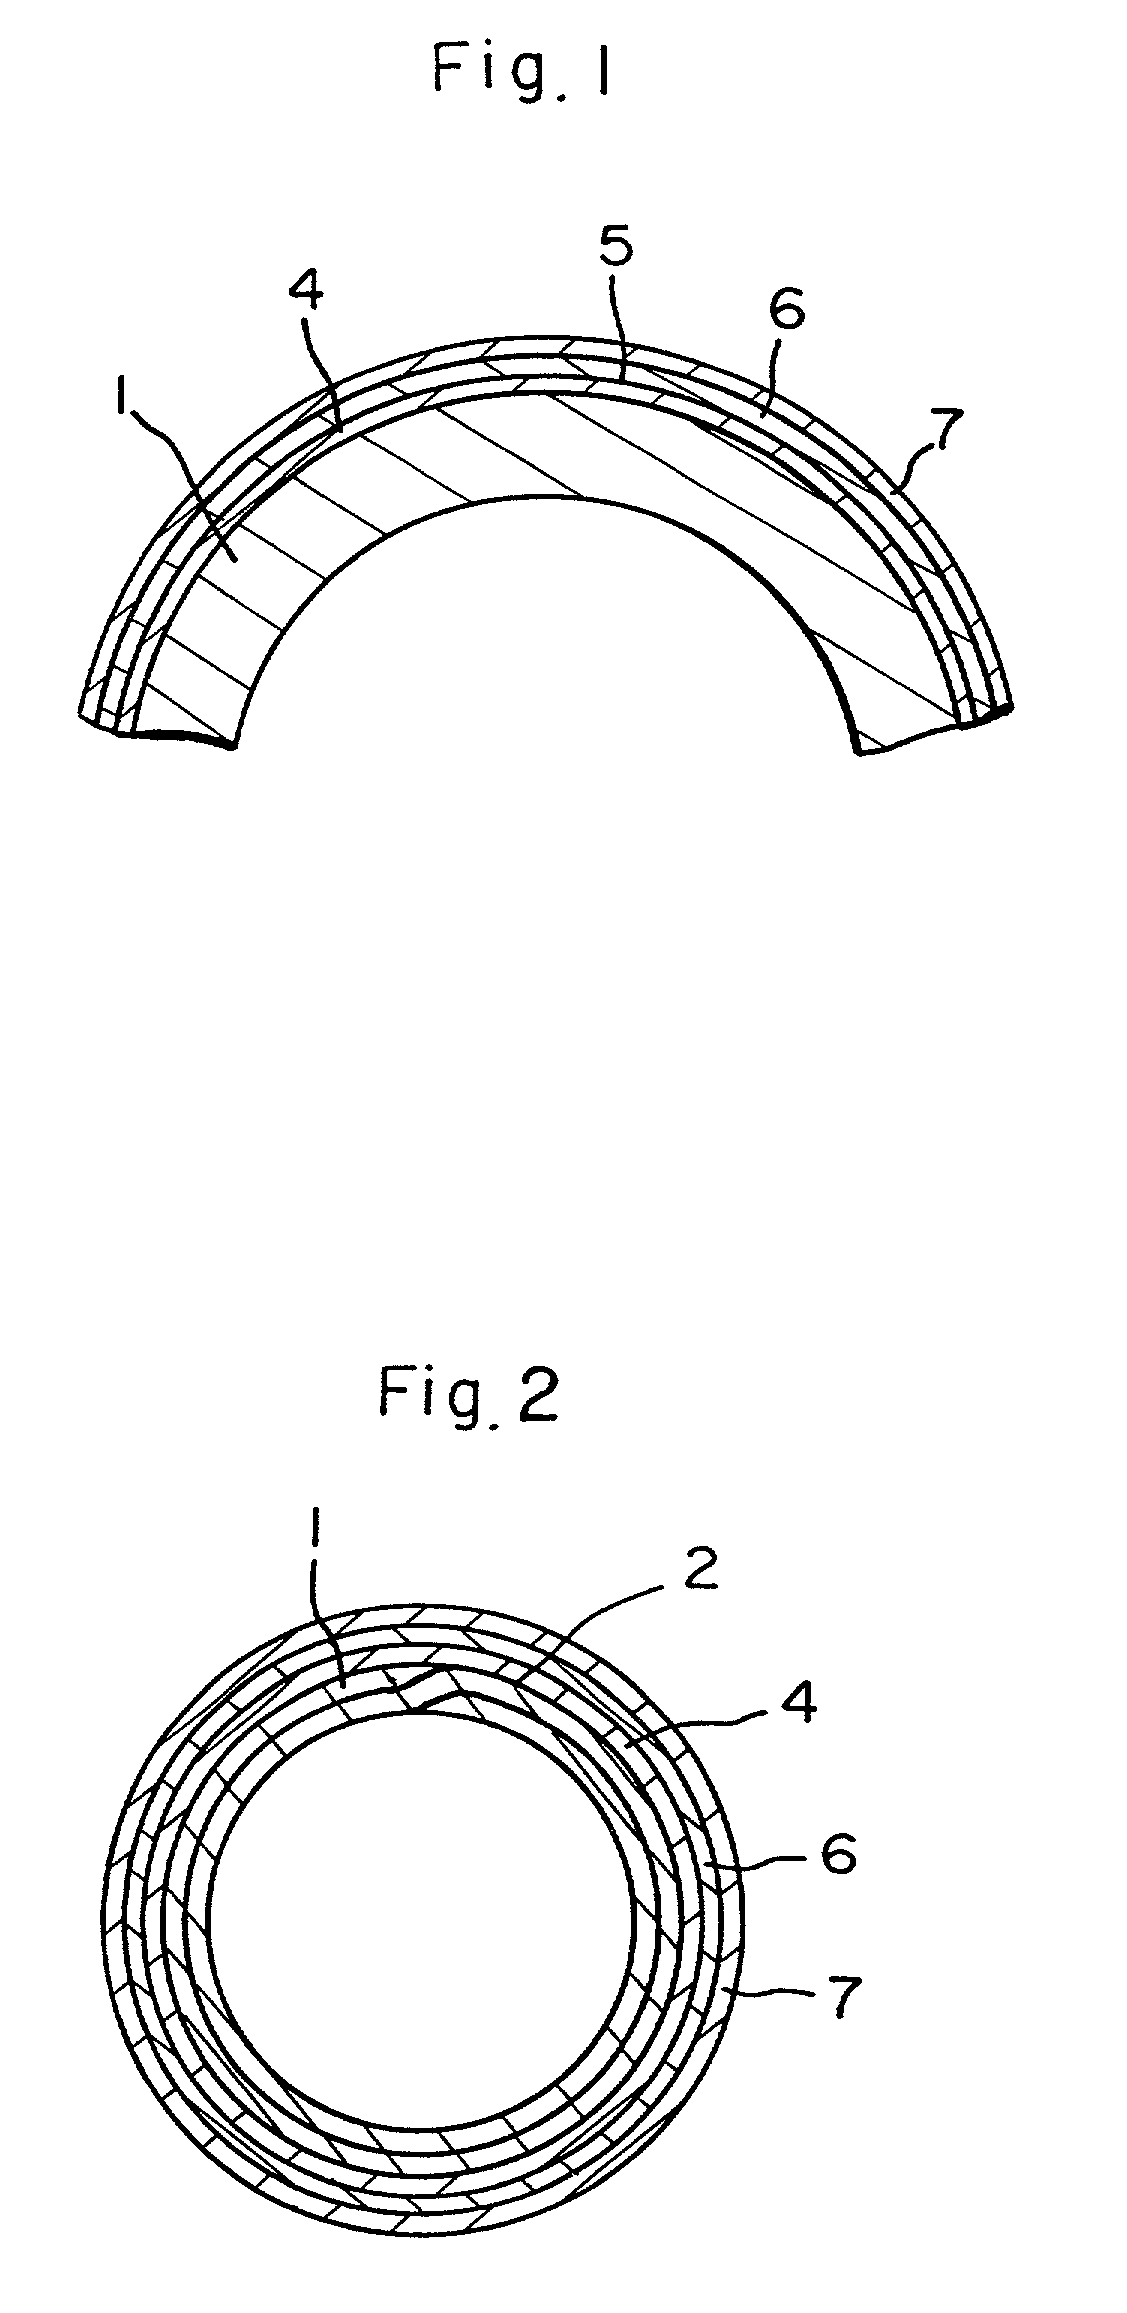 Heat and corrosion resistant steel pipe having multi-layered coating